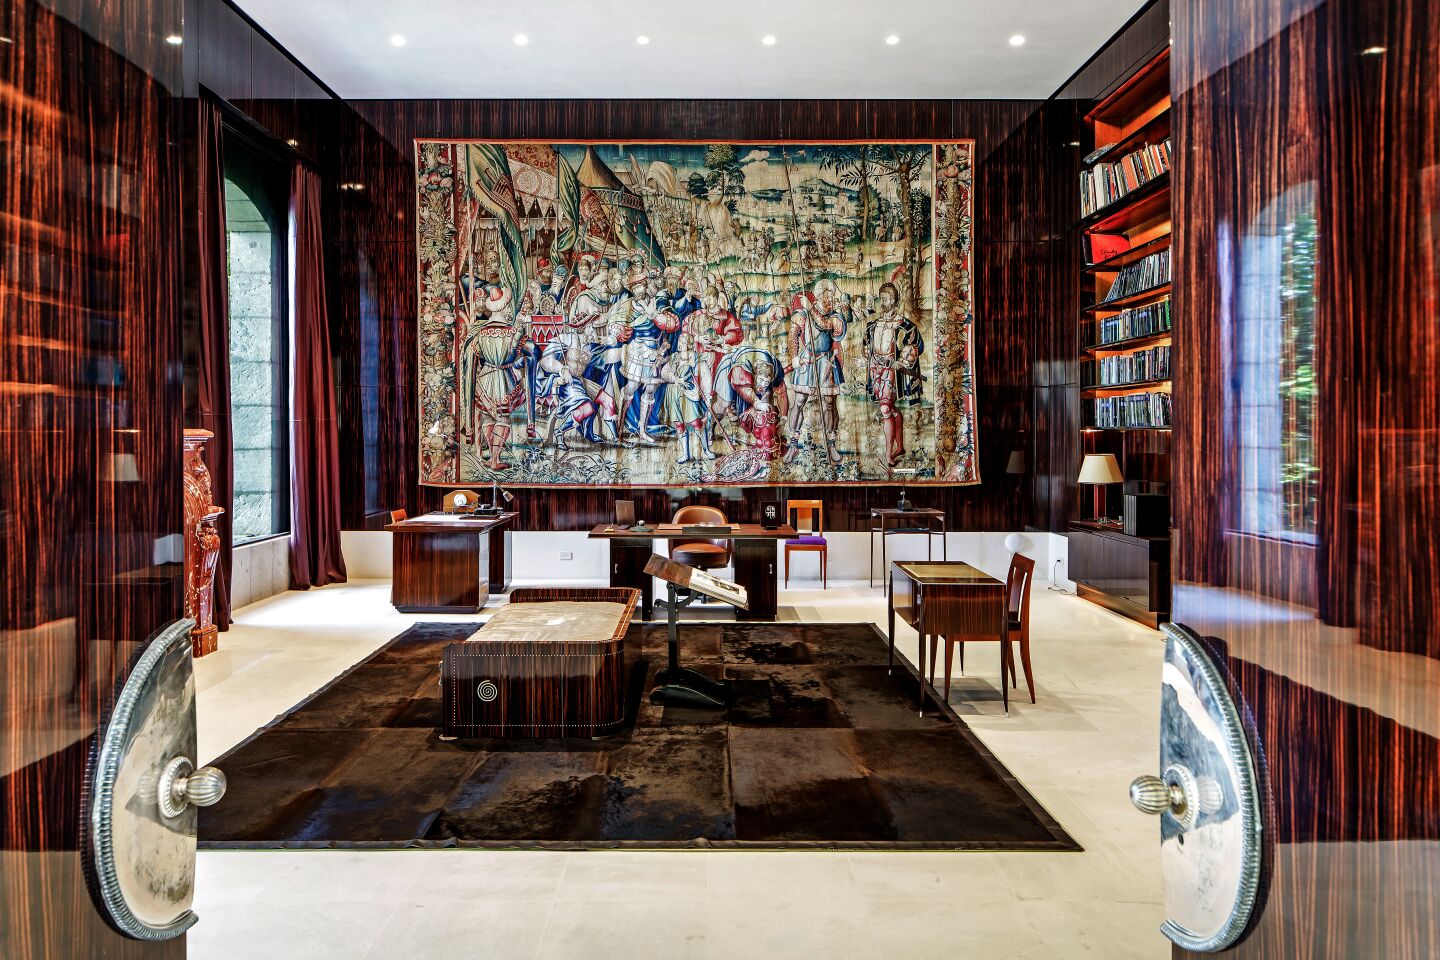 Designed and custom built by the former couple over a seven-year period, the sprawling showplace was intended to showcase an extensive art collection.